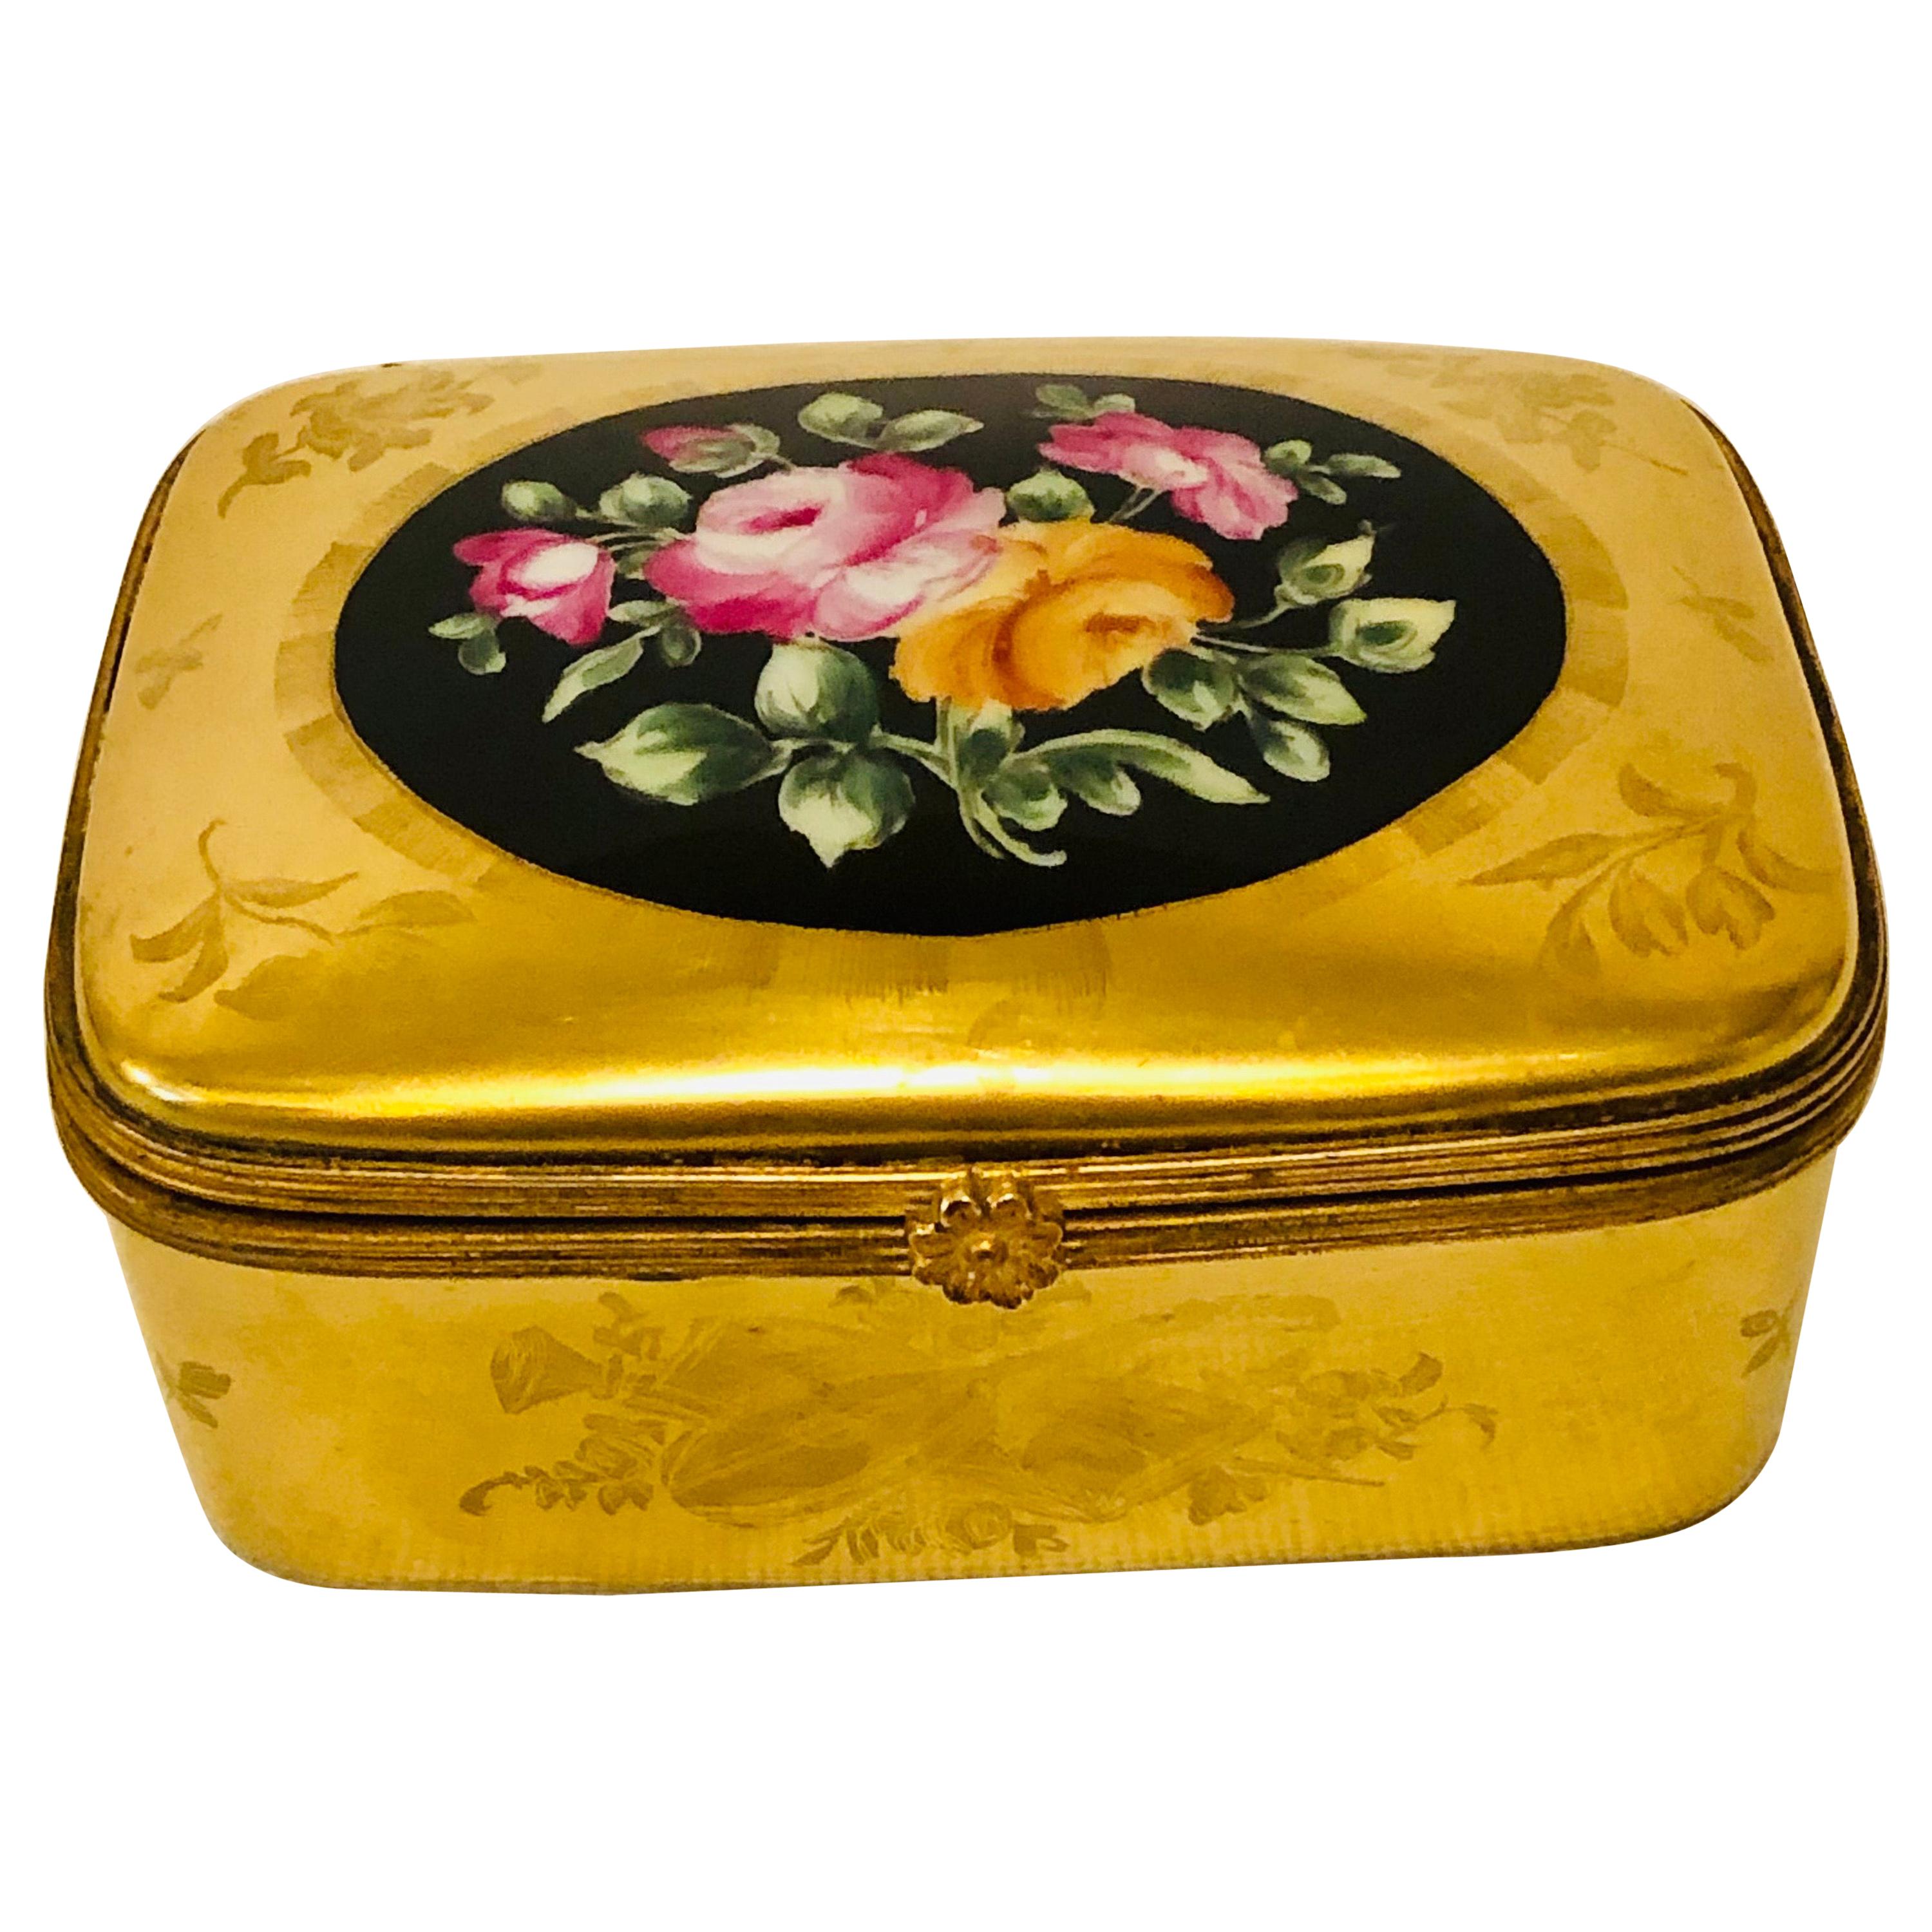 Le Tallec Box with a Gold BackGround and a Central Painting of a Flower Bouquet